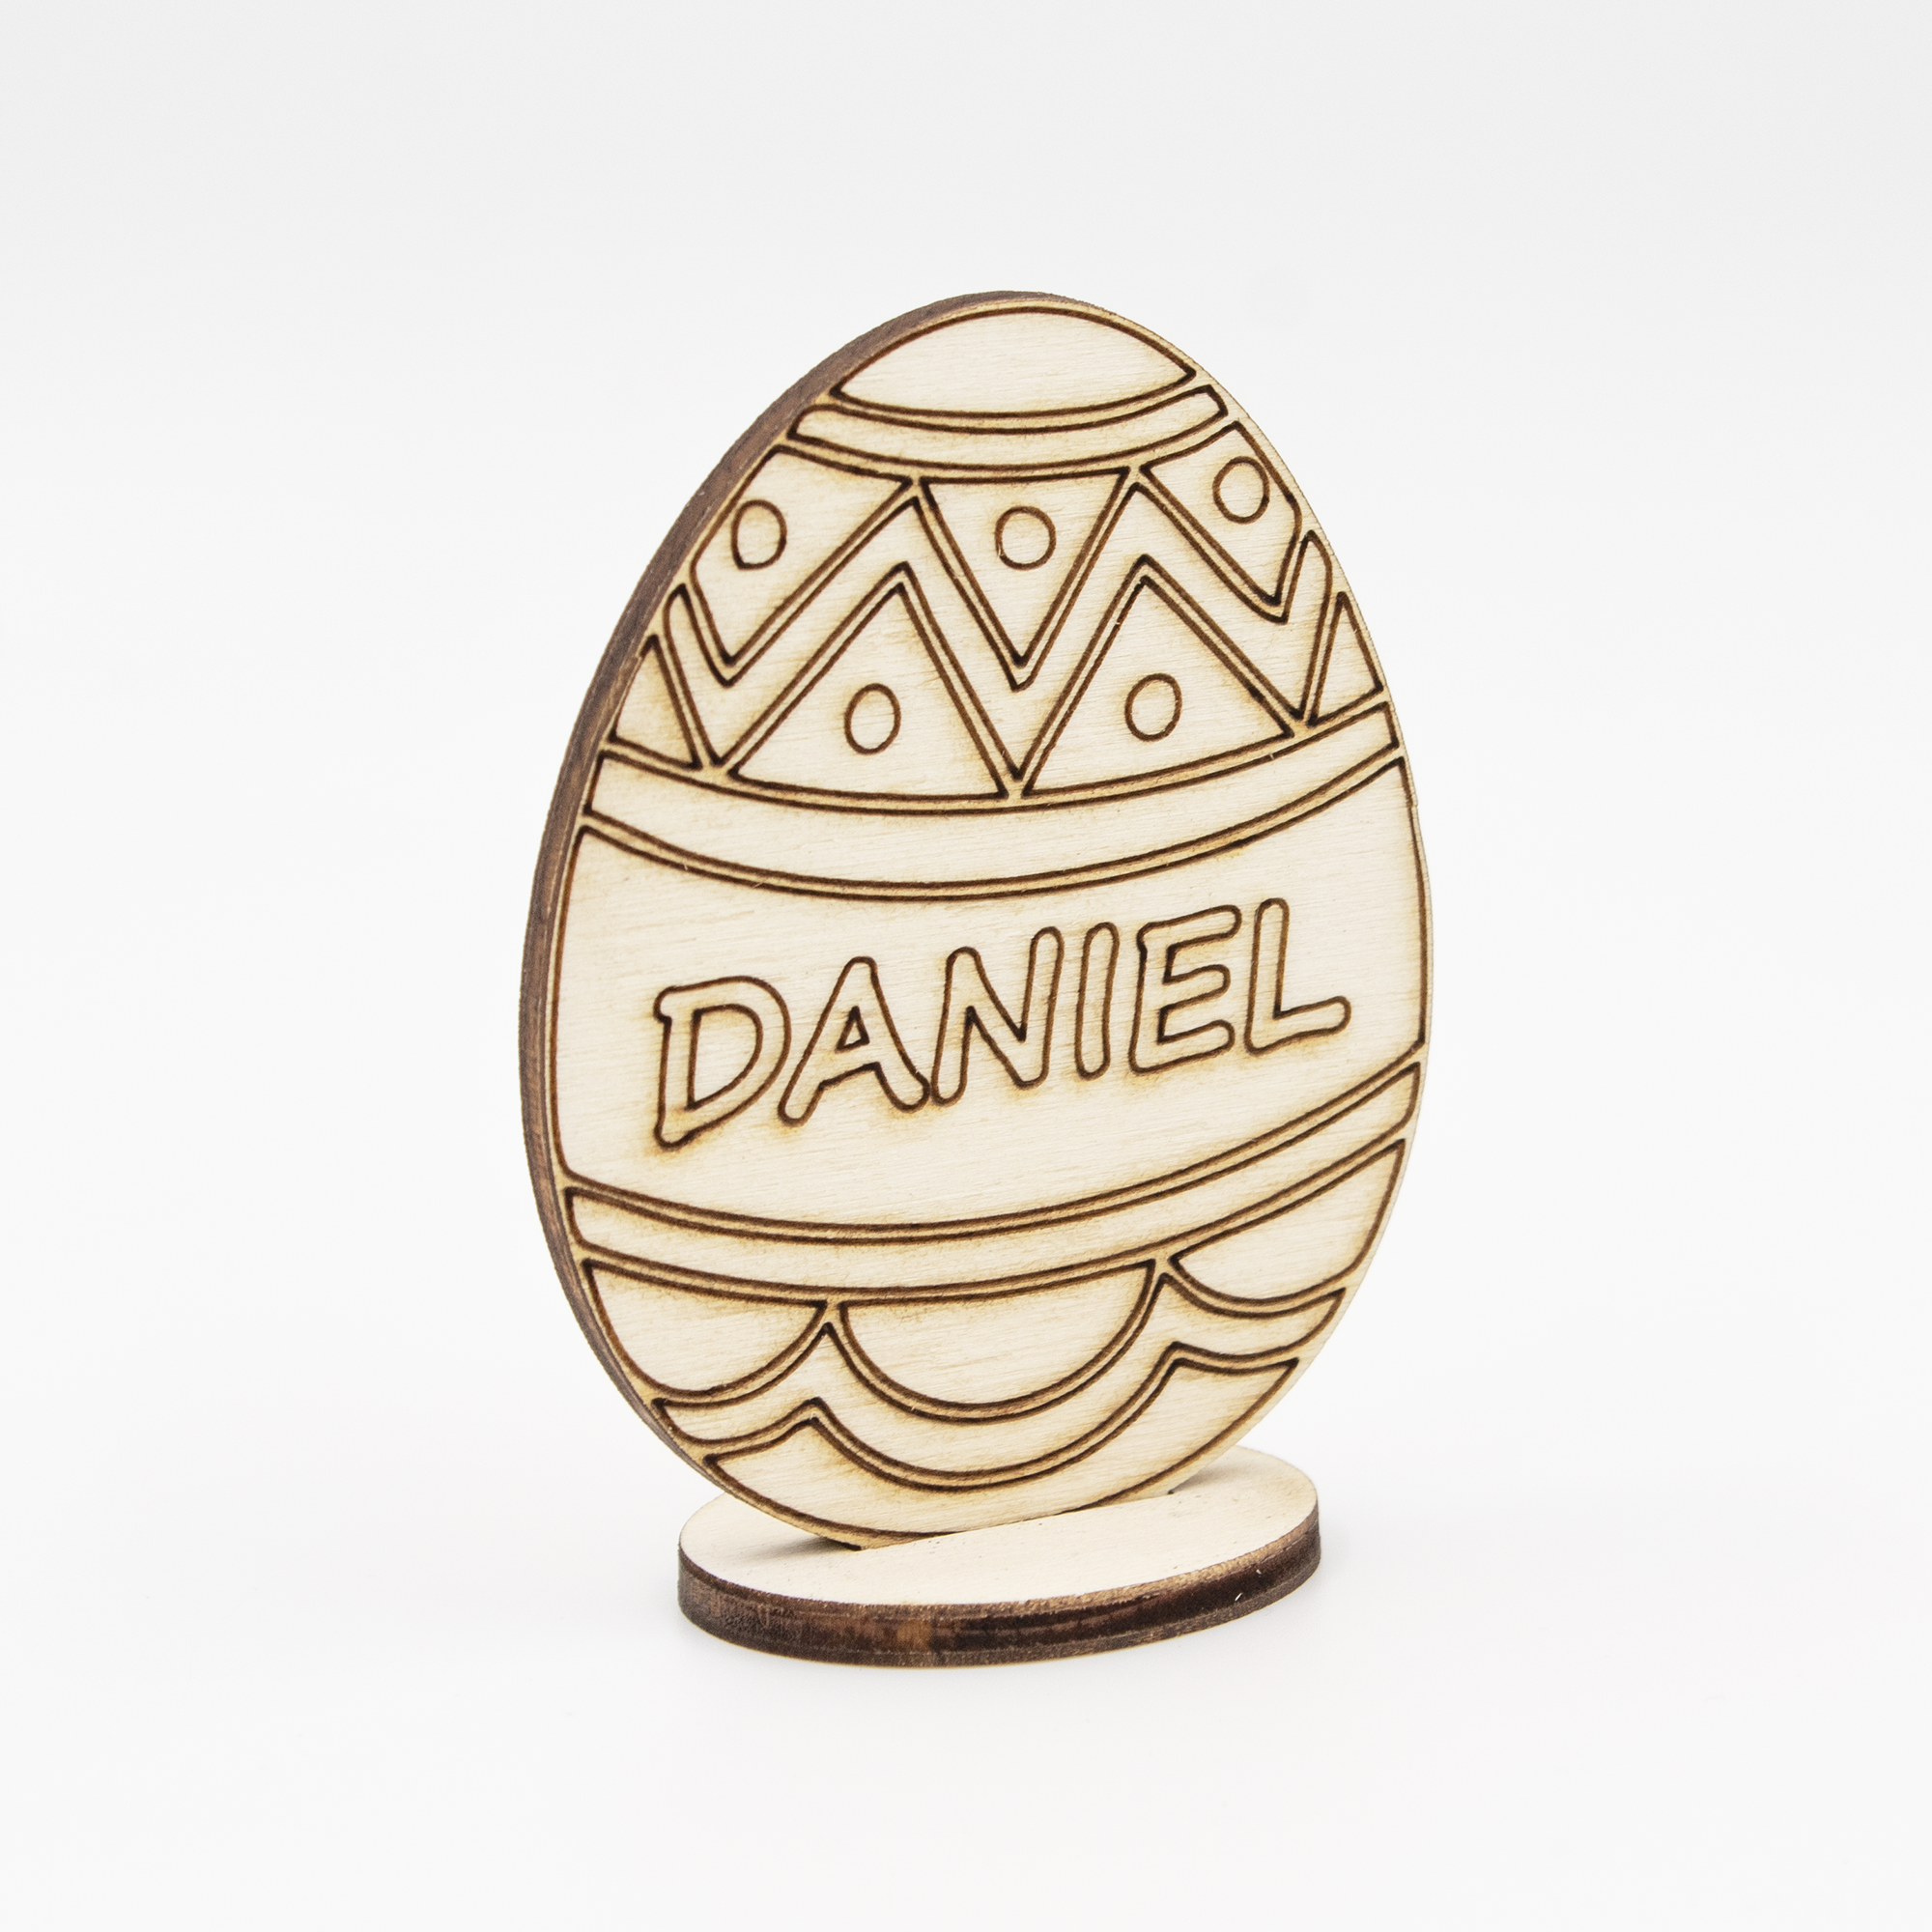 Enhance your Easter celebration with our custom wooden Easter egg stand on a base. Made from high-quality wood, this stylish and durable stand is perfect for displaying your personalized Easter egg. Engrave it with a name or message of your choice for a unique gift that will be cherished for years to come. Whether used as a centerpiece or accent piece for your home decor, this wooden egg stand is sure to impress. Material: Wood.